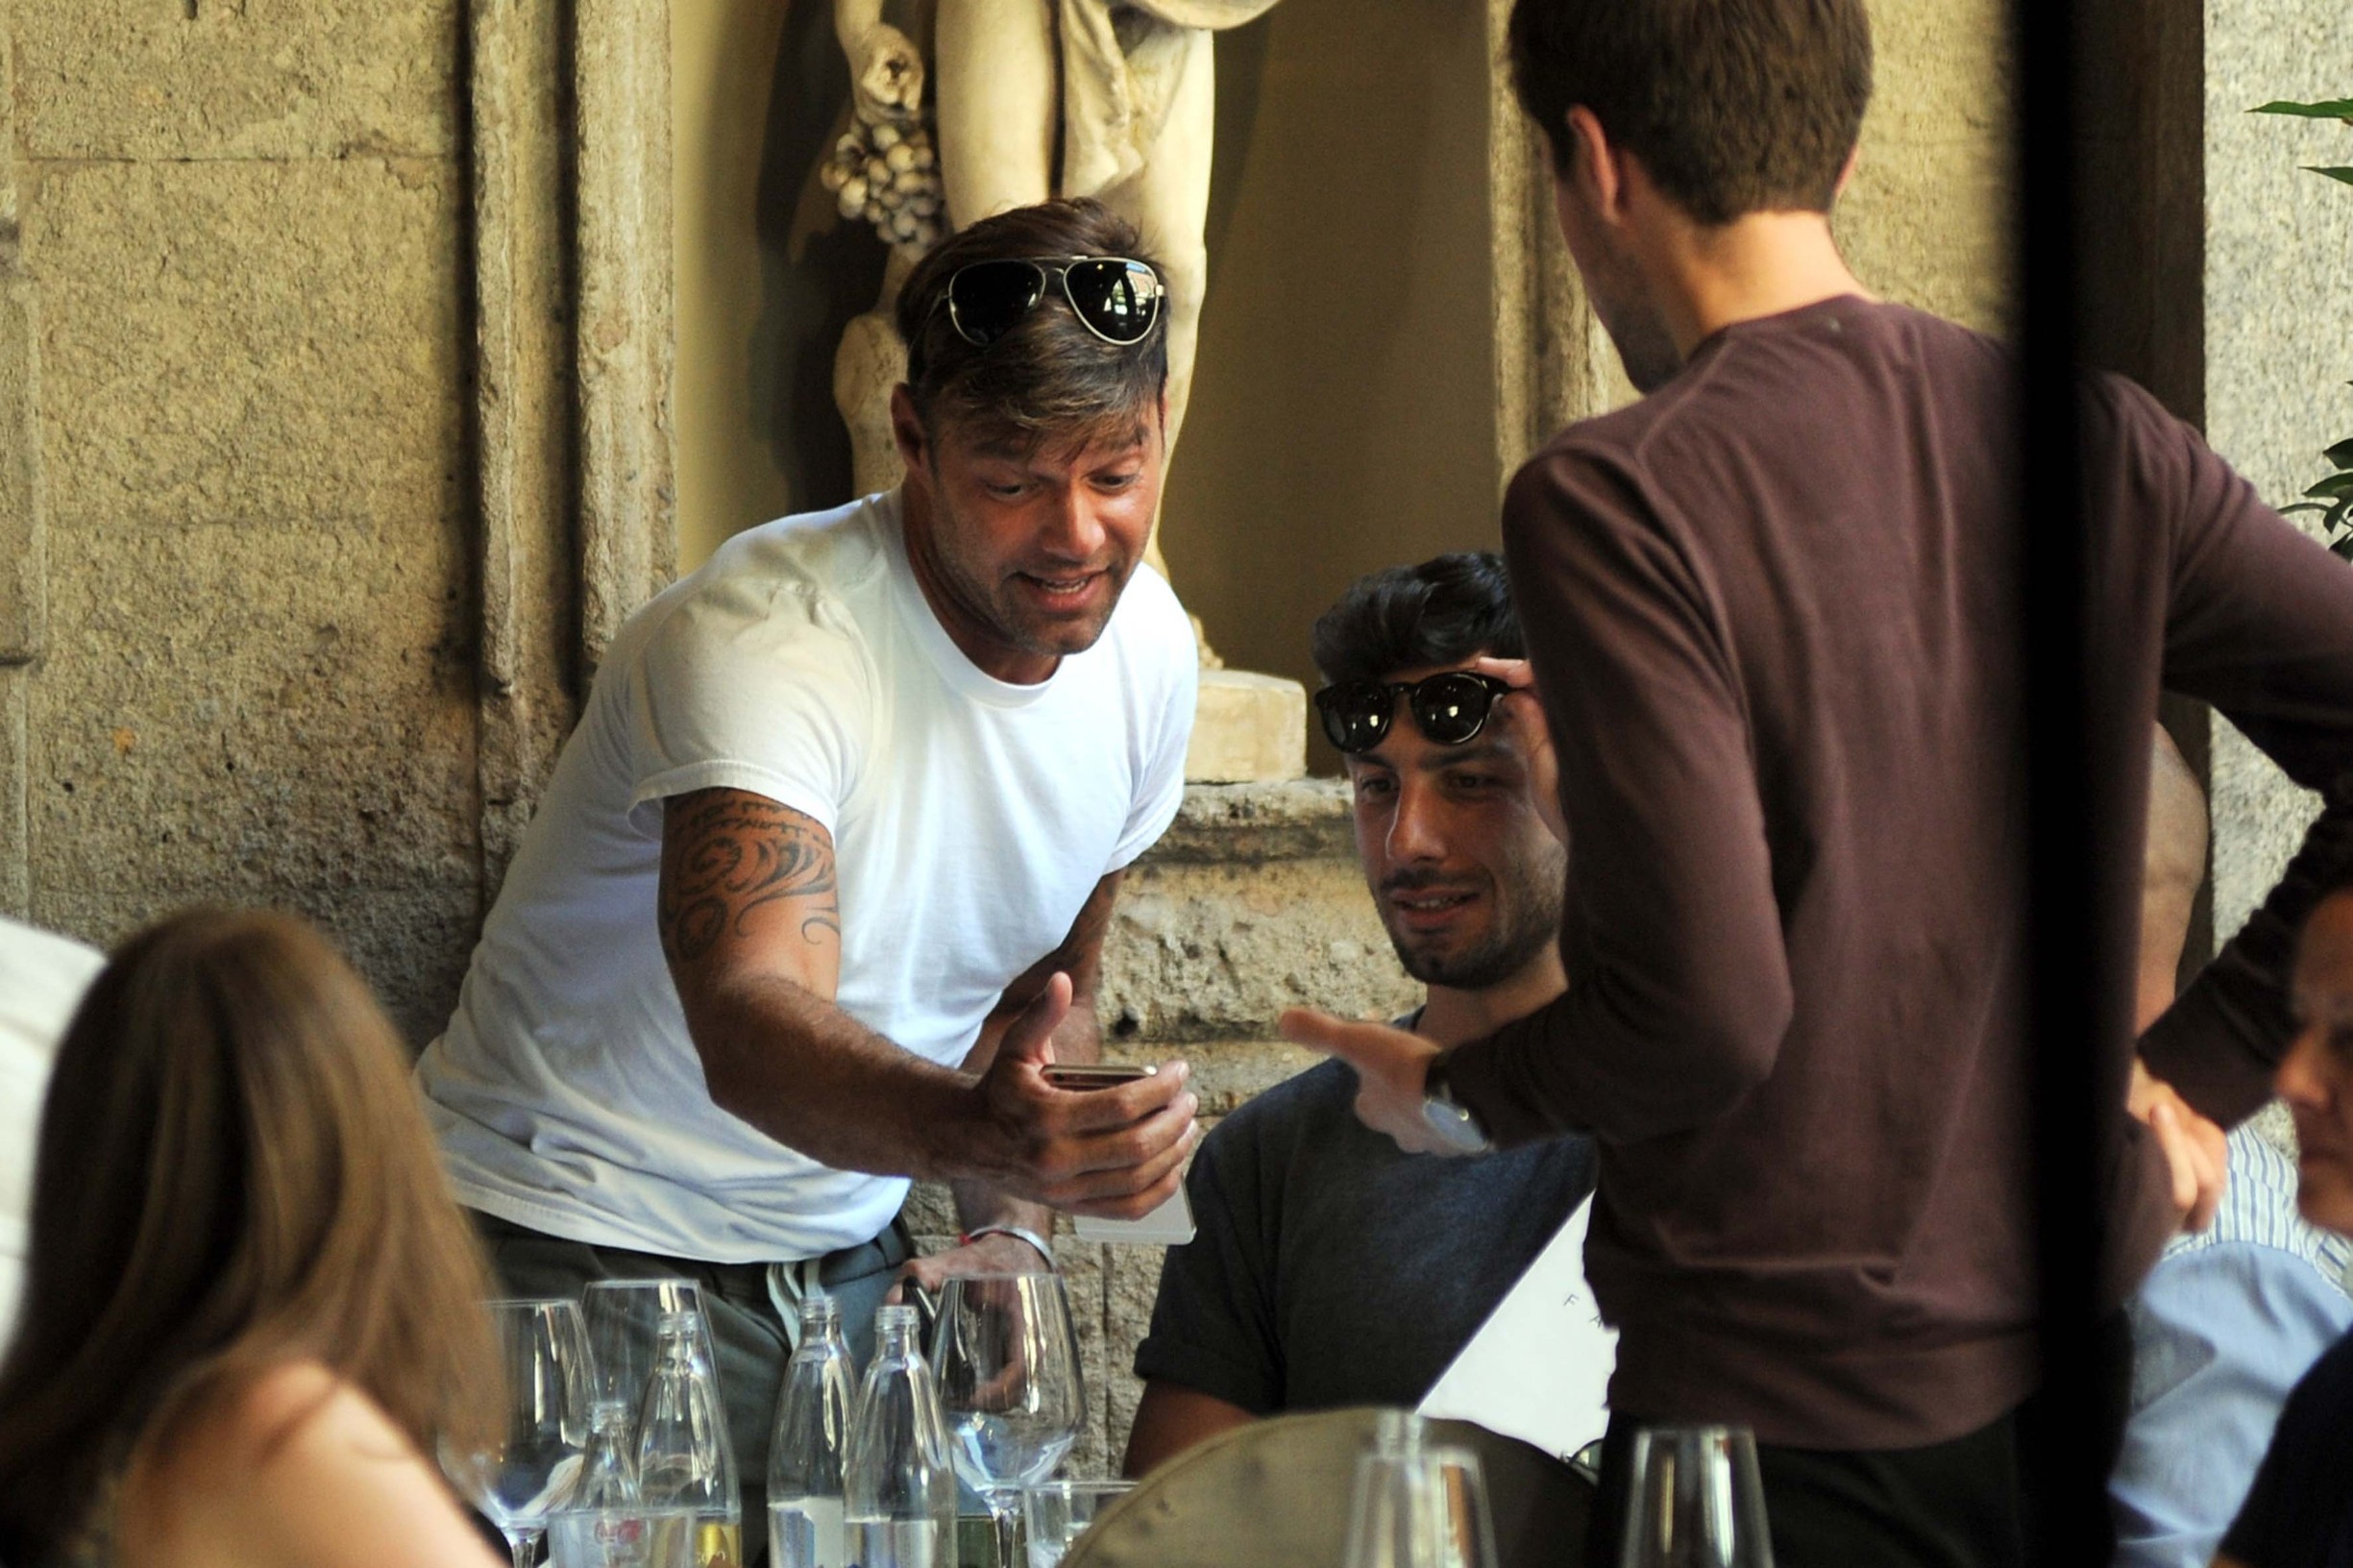 *****EXCLUSIVE*****
RICKY MARTIN WITH HIS NEW BOYFRIEND IN ITALY.
Milan, 20 June 2016
Singer Ricky Martin, who is Italy to attend the Milan Fashion Week, is seen with his boyfriend Jwan Josef having lunch at 